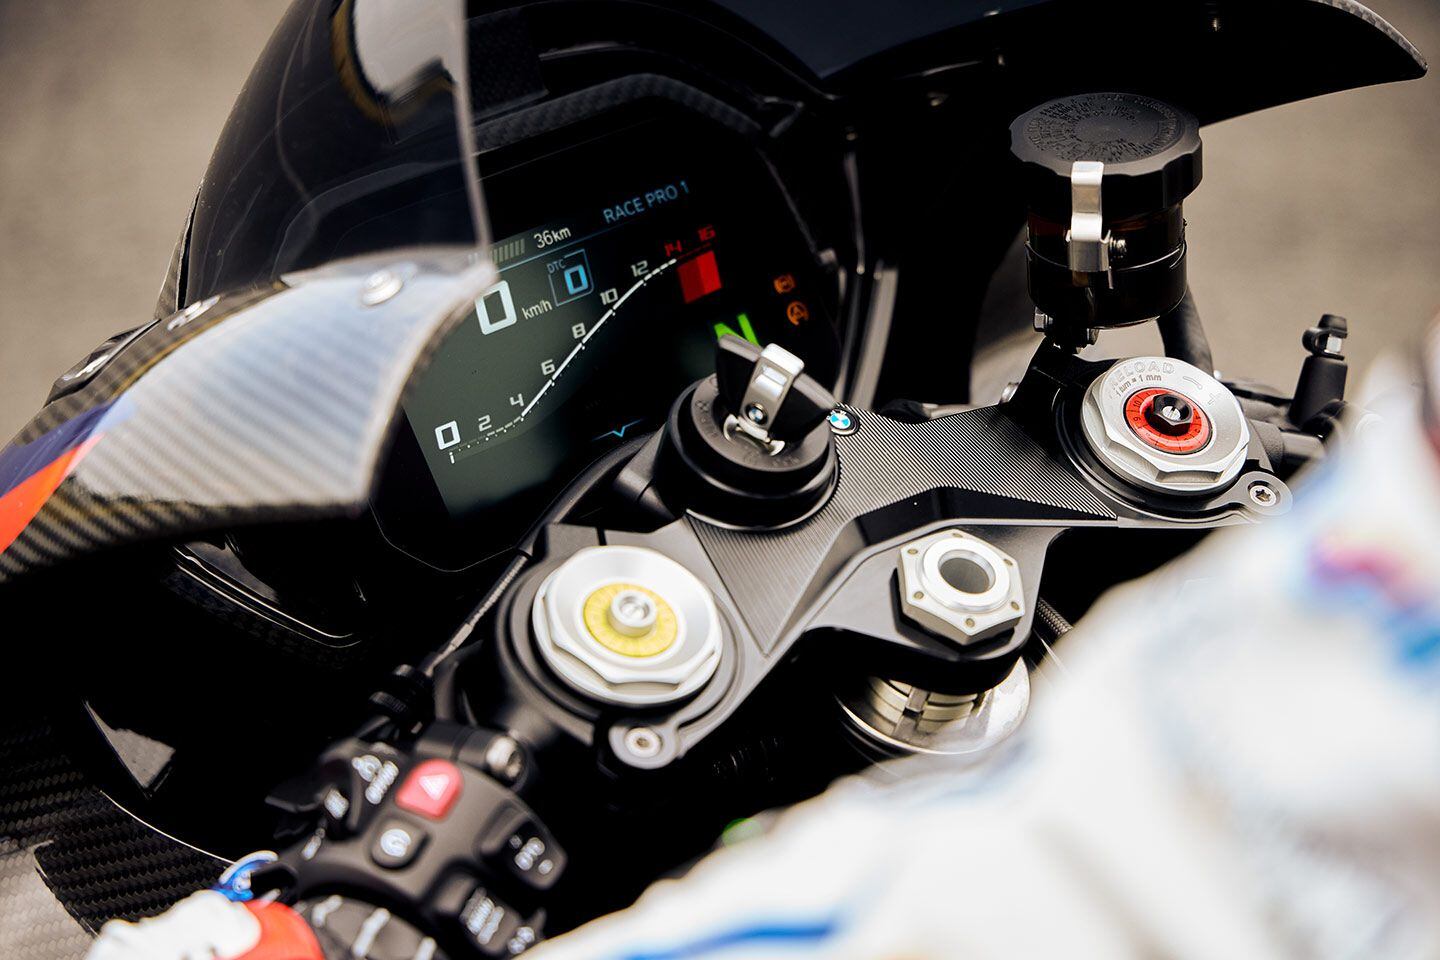 The M 1000 RR has the requisite Rain, Road, Dynamic, and Race settings, but it also has three Race Pro settings to dial in your perfect setup.